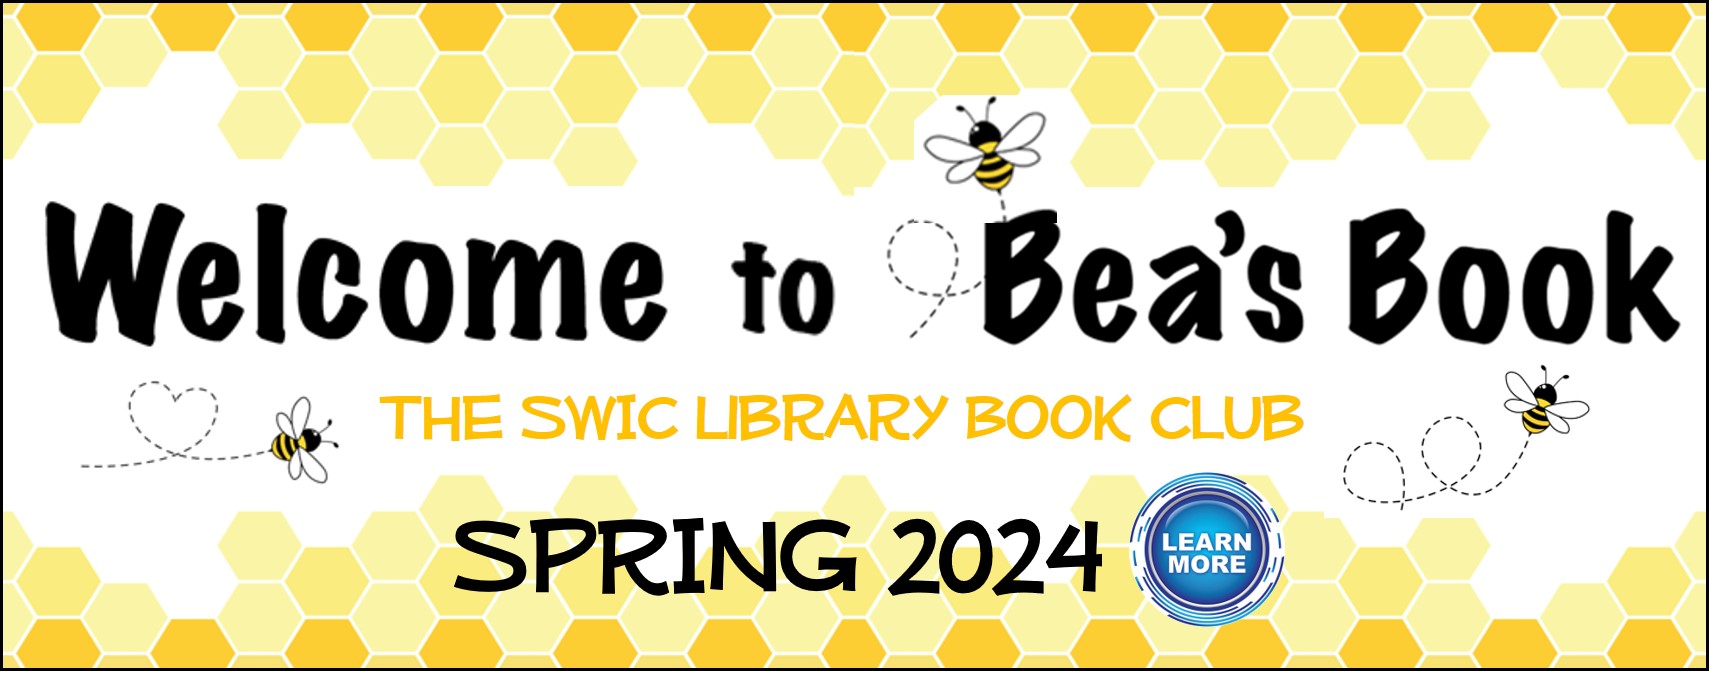 Library - Bea's Book Banner Spring 2024